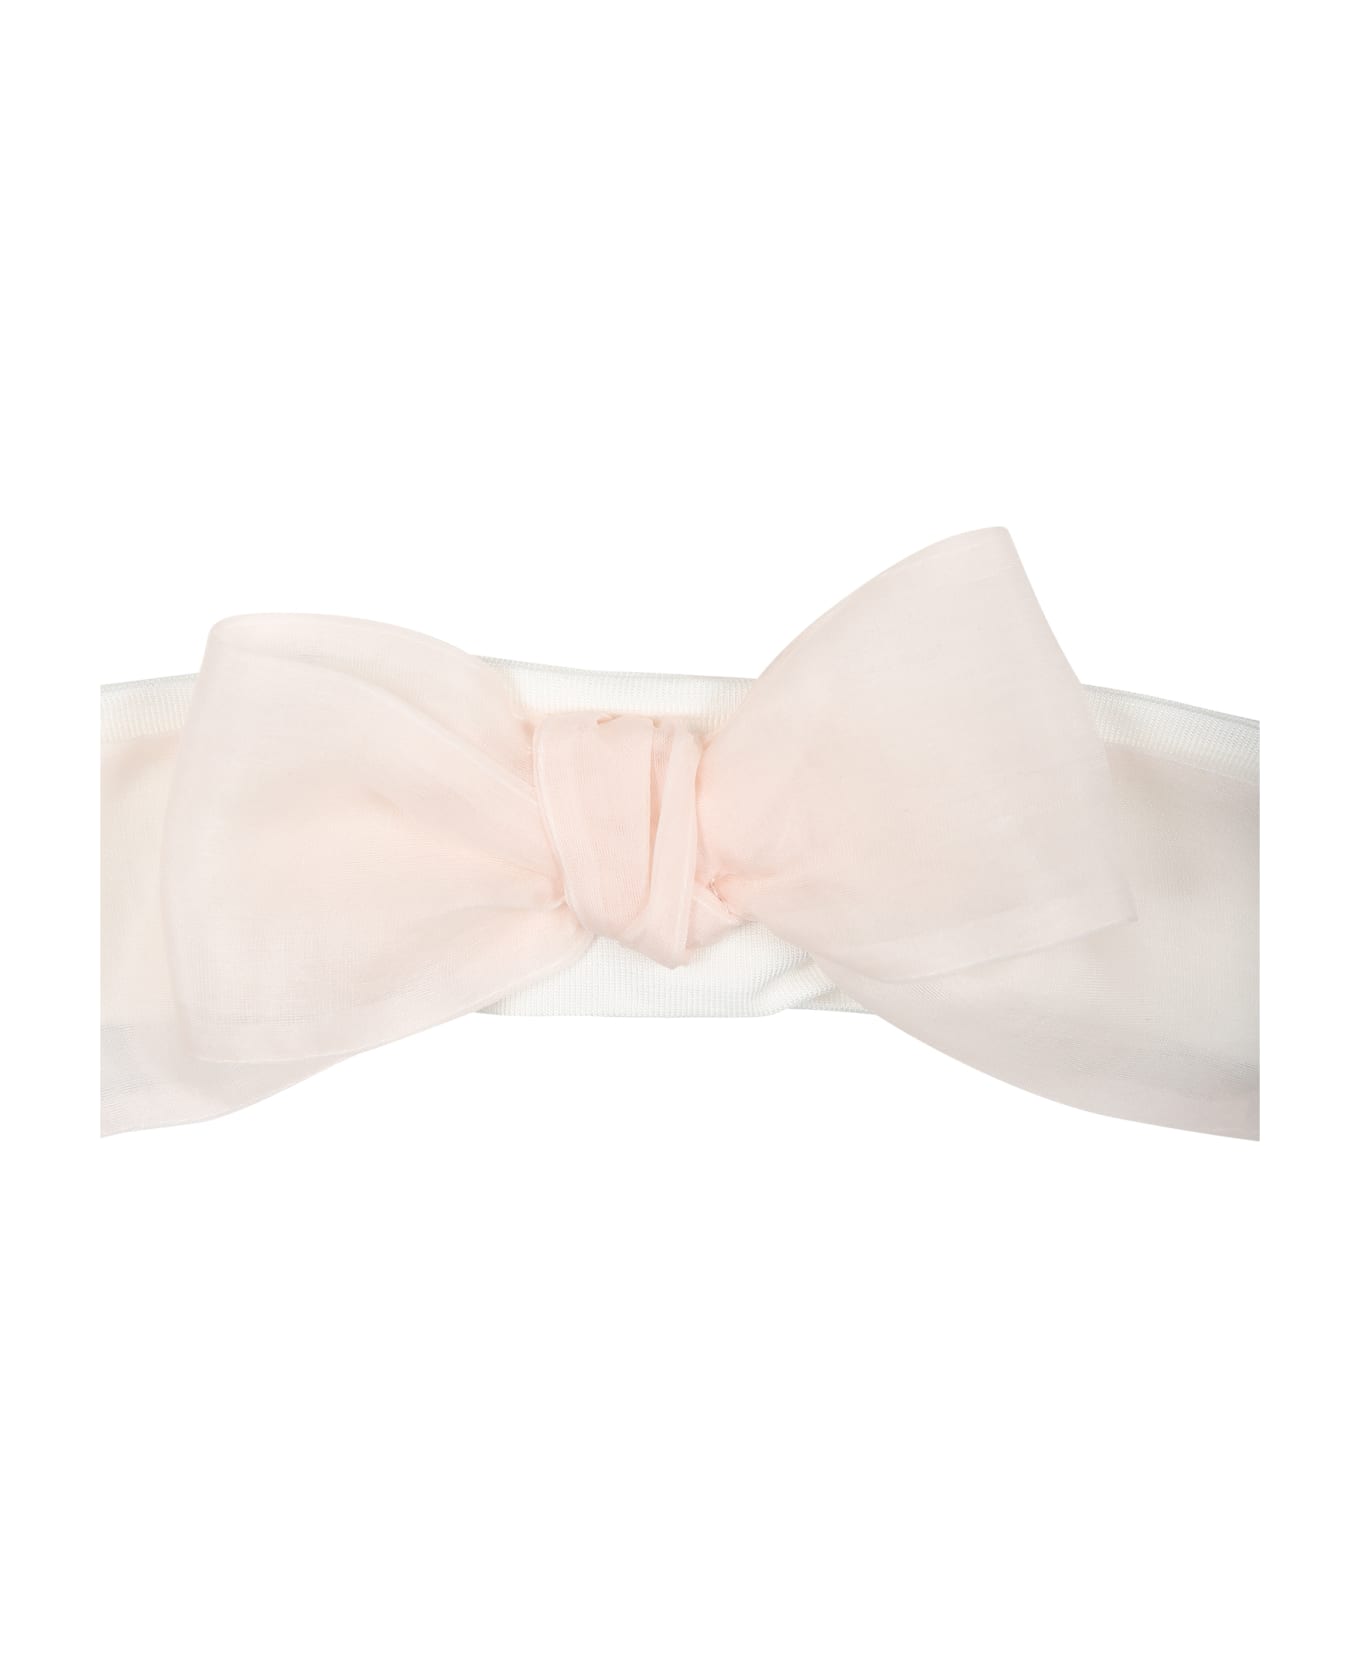 La stupenderia White Headband For Baby Girl With Pink Bow - White